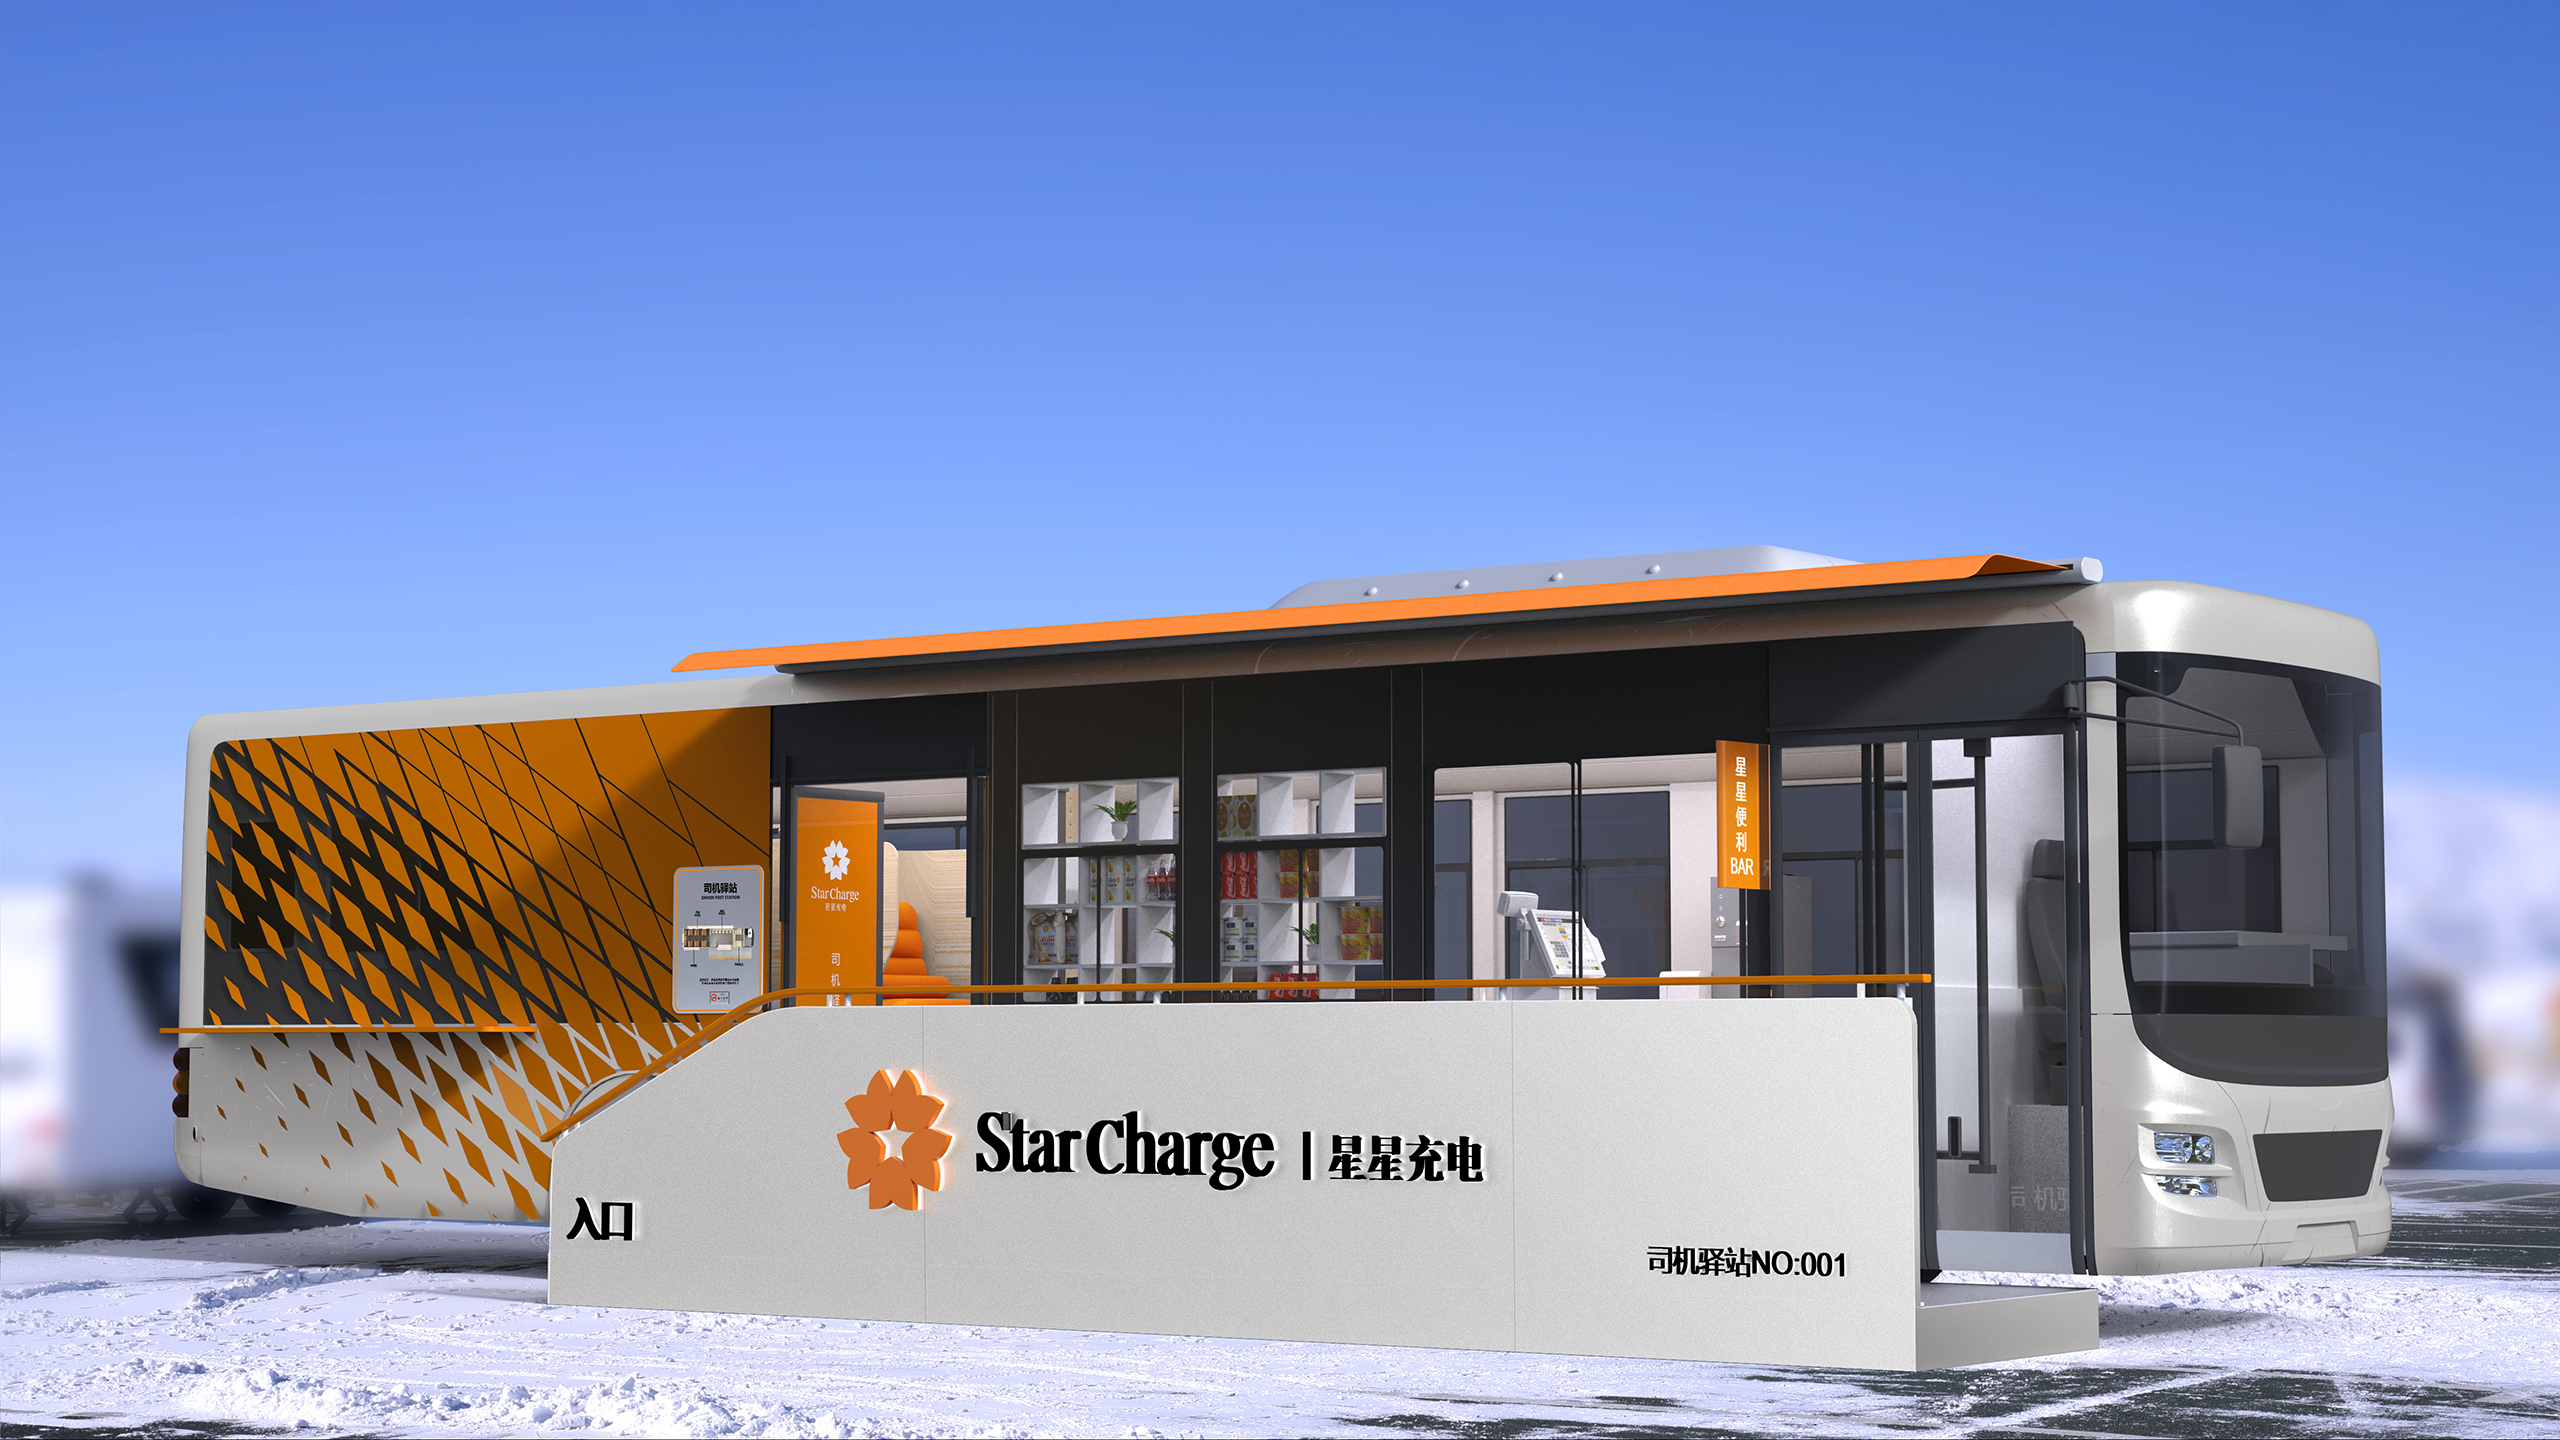 Reconstruction of retired bus with Star Charge